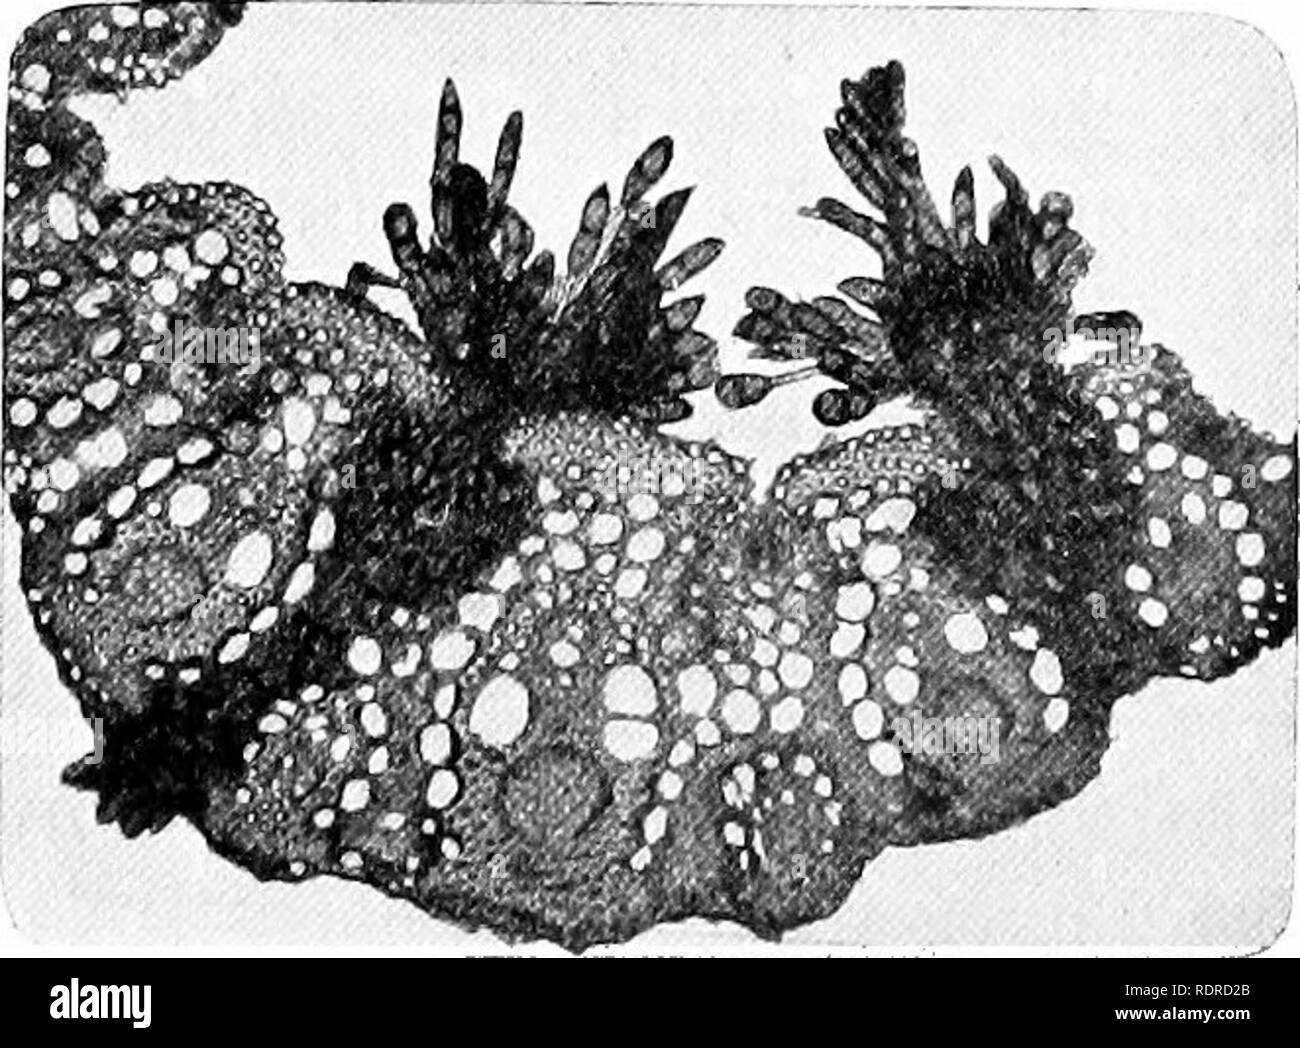 . Introduction to botany. Botany. w Fig. 141. A, clusters of uredospores of wheat rust breaking through the epiderinis between the parallel veins of a leaf of wheat. B, a cross section through one of the spore clusters of A, showing the uredospores highly magnified. to other leaves by the wind, put forth enter the leaf through the stomata.. Fig. 142. Photomicrograph of a cross section of a grass leaf parasitized by Puccinia. The mycelium of the fungus extends through the leaf and bears clus- ters of teleutospores at the upper surface. minate and produce filaments, each spores (Fig. 143) which  Stock Photo